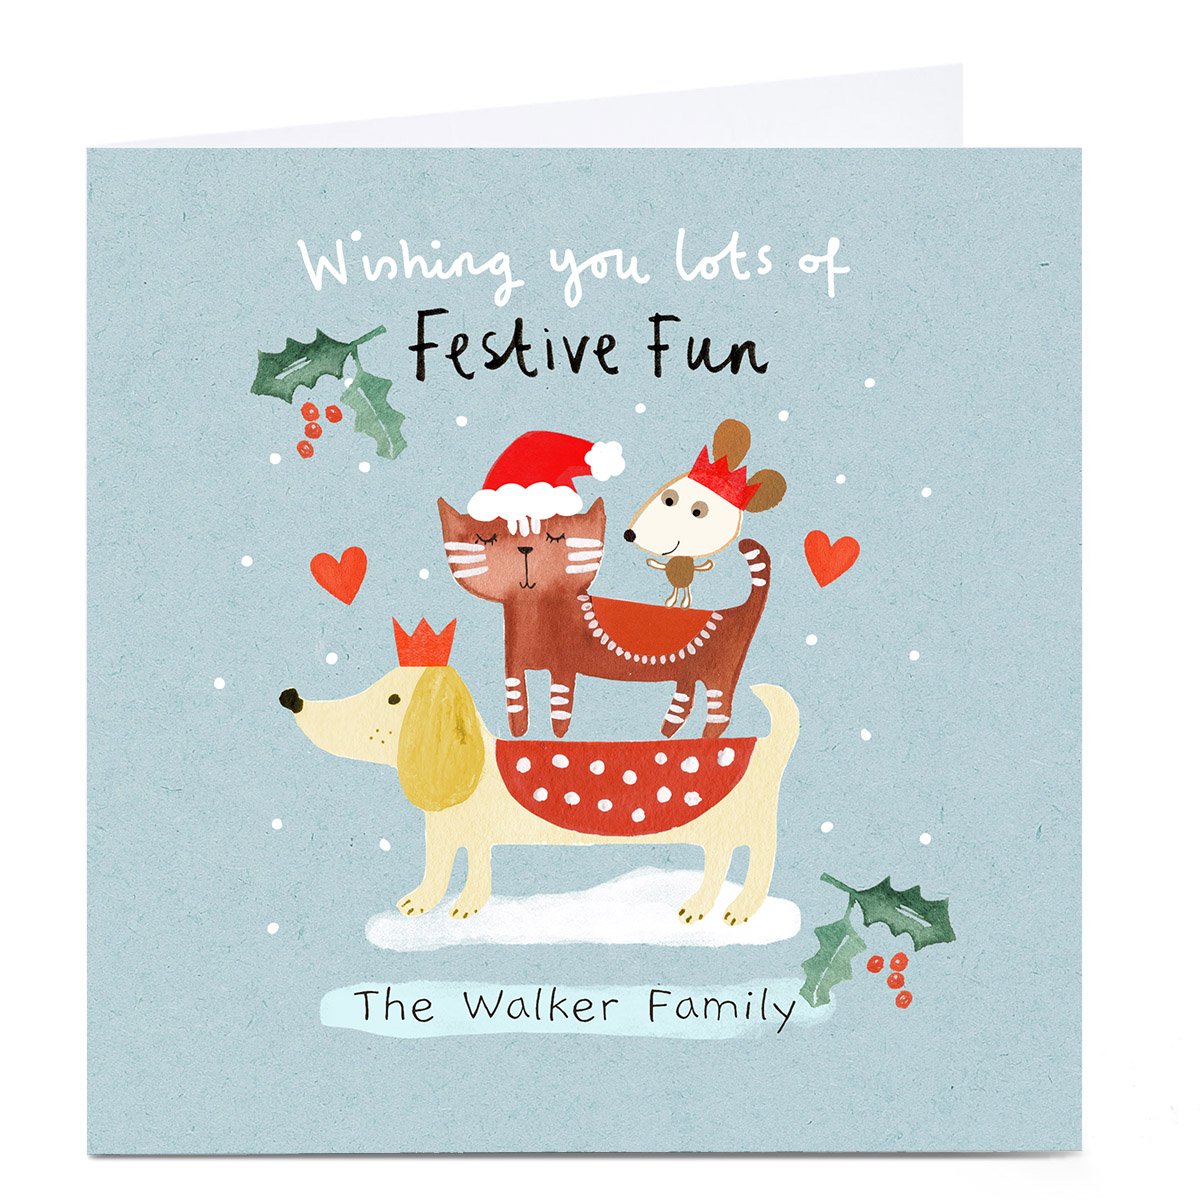 Personalised Lindsay Loves To Draw Christmas Card - Festive Fun 